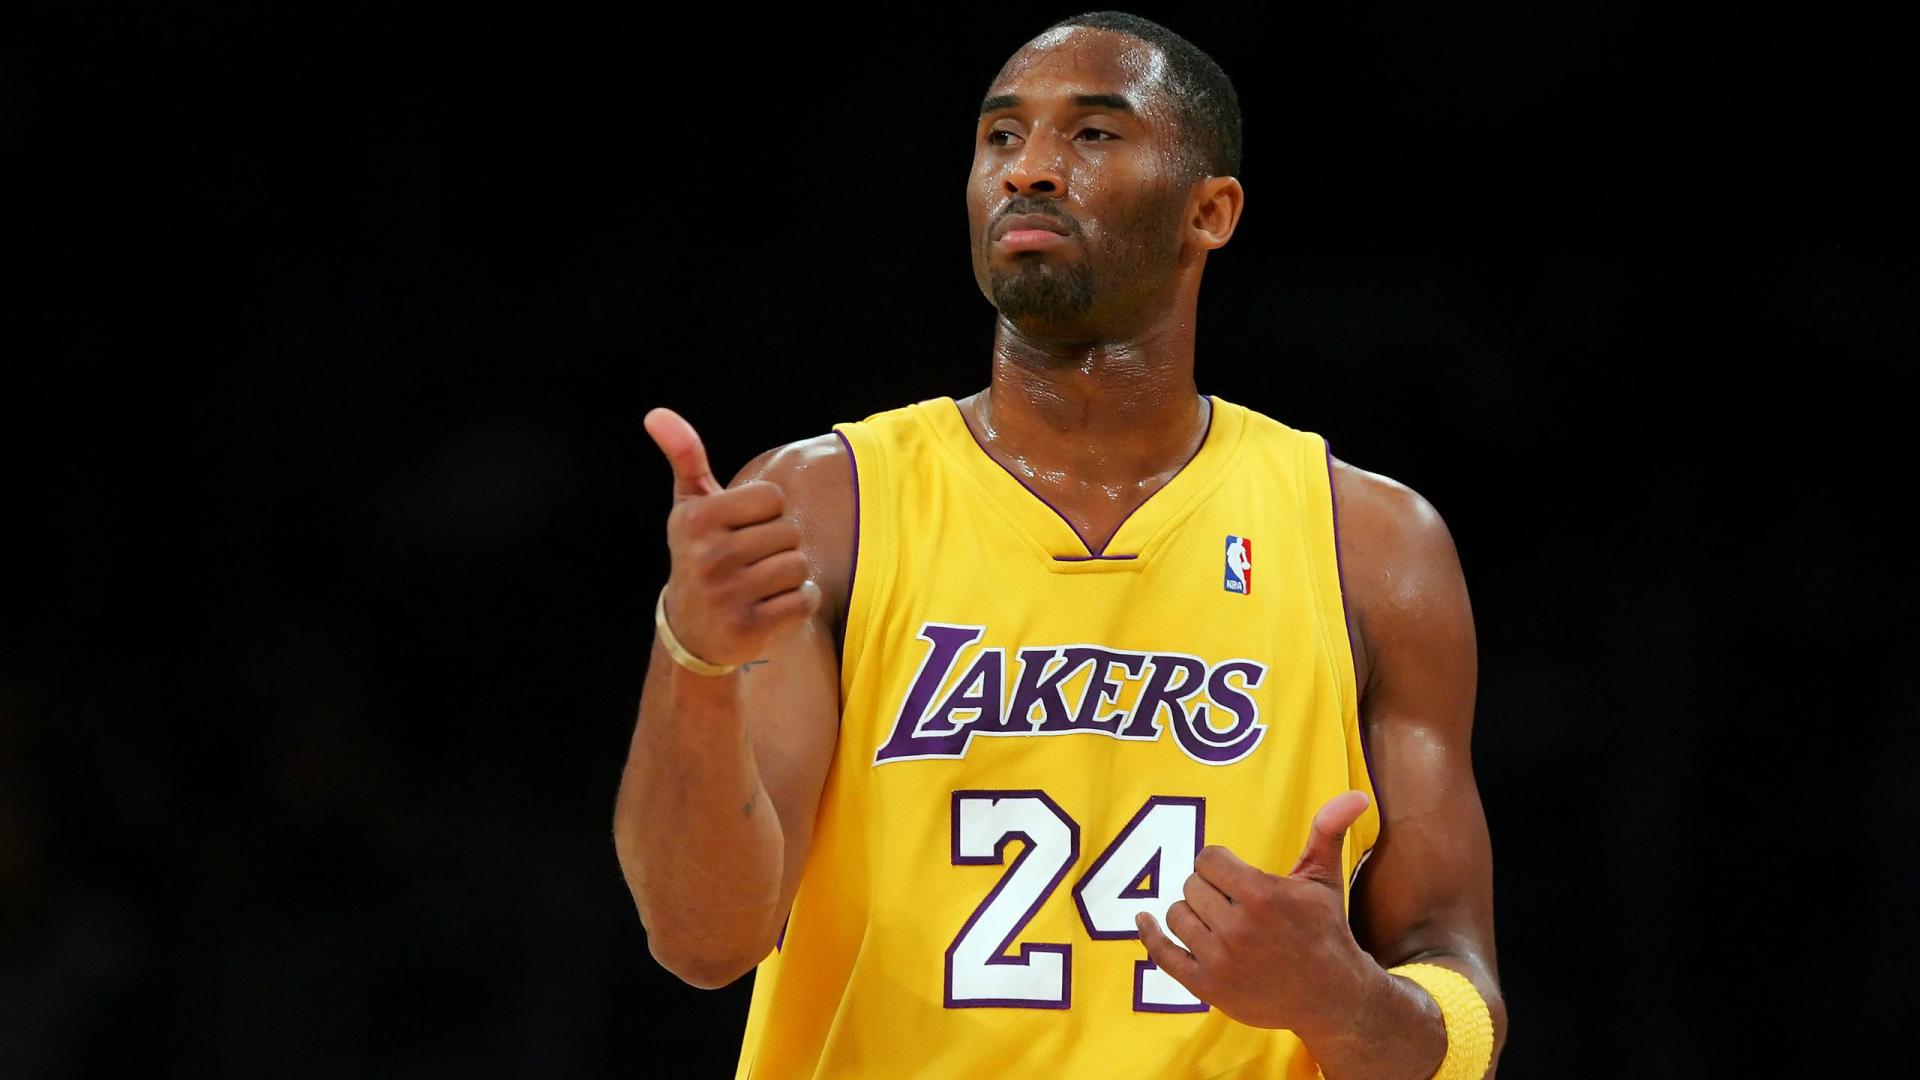 Kobe Bryant Number 24 Lakers Photo Picture Image 2013 HD Wallpaper